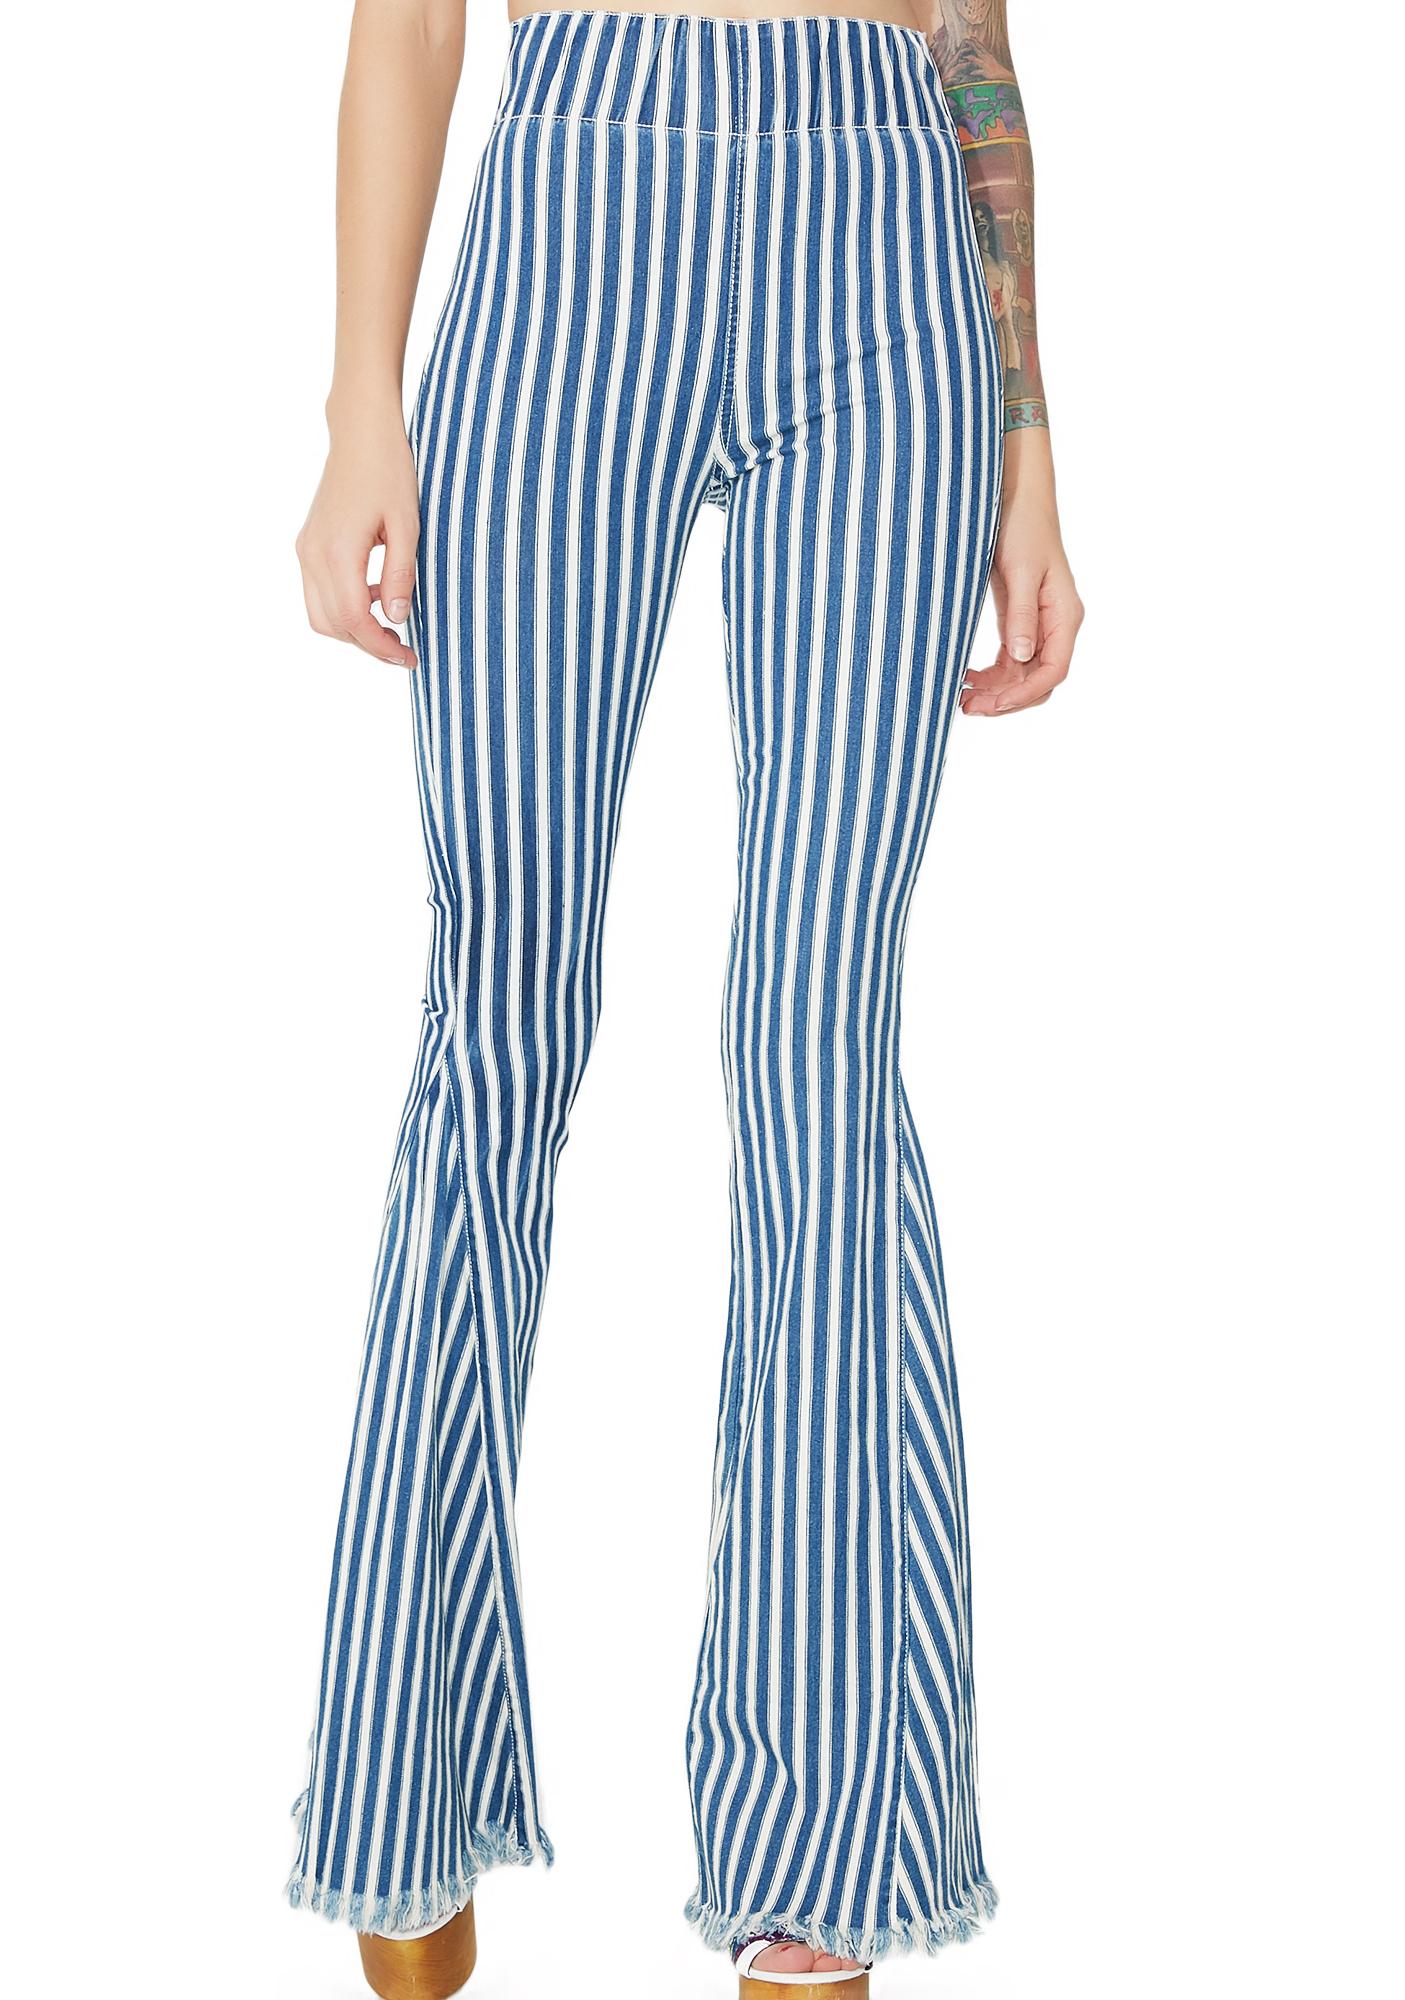 blue and white striped bell bottom jeans